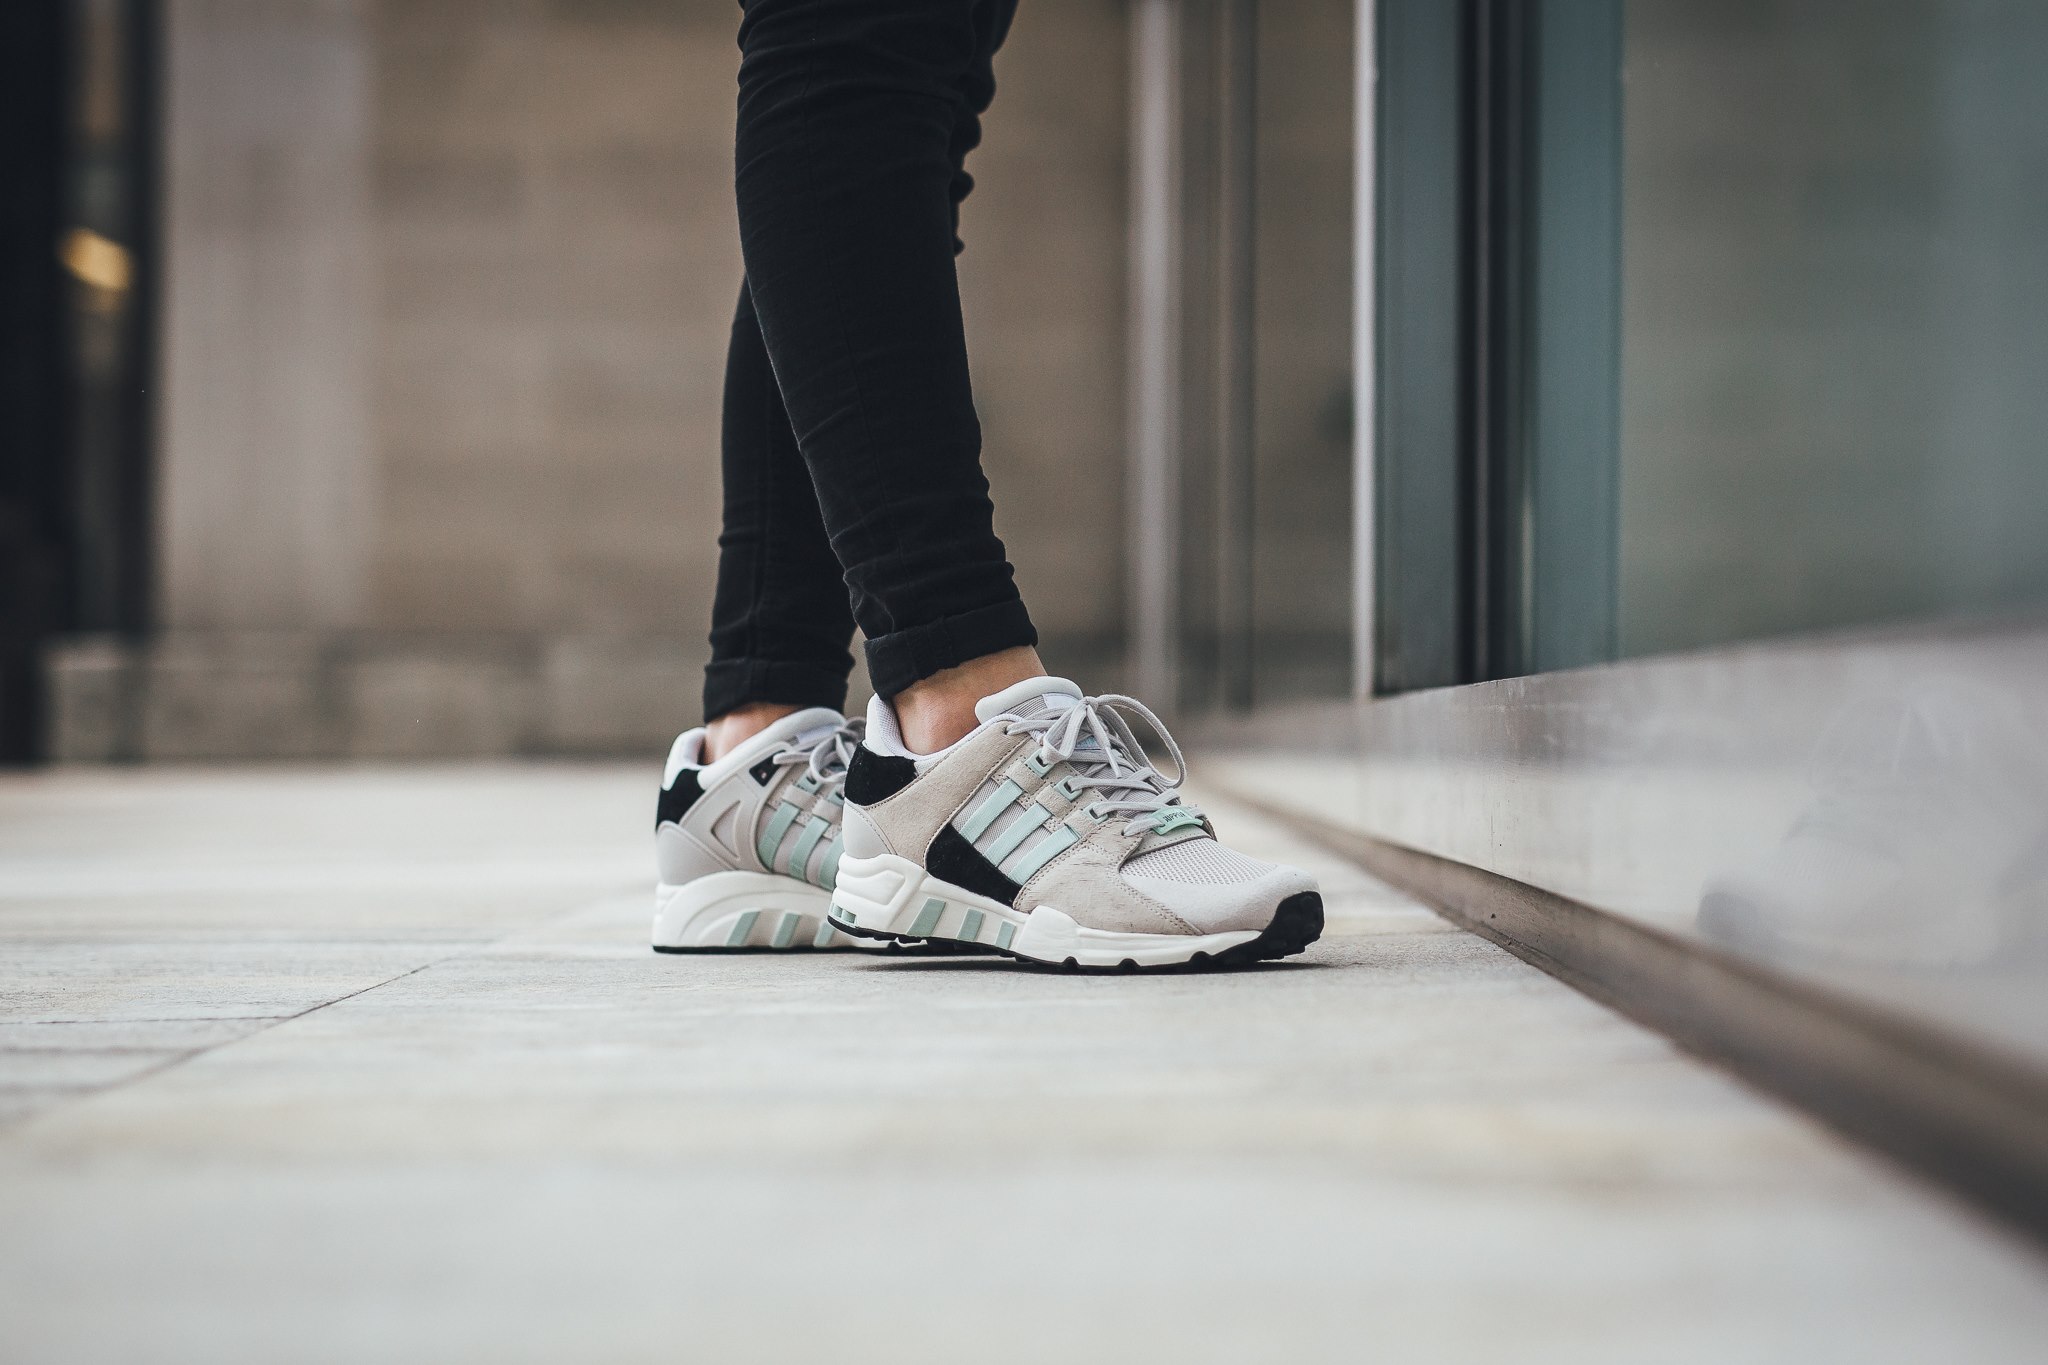 adidas women's eqt support 93 sneakers